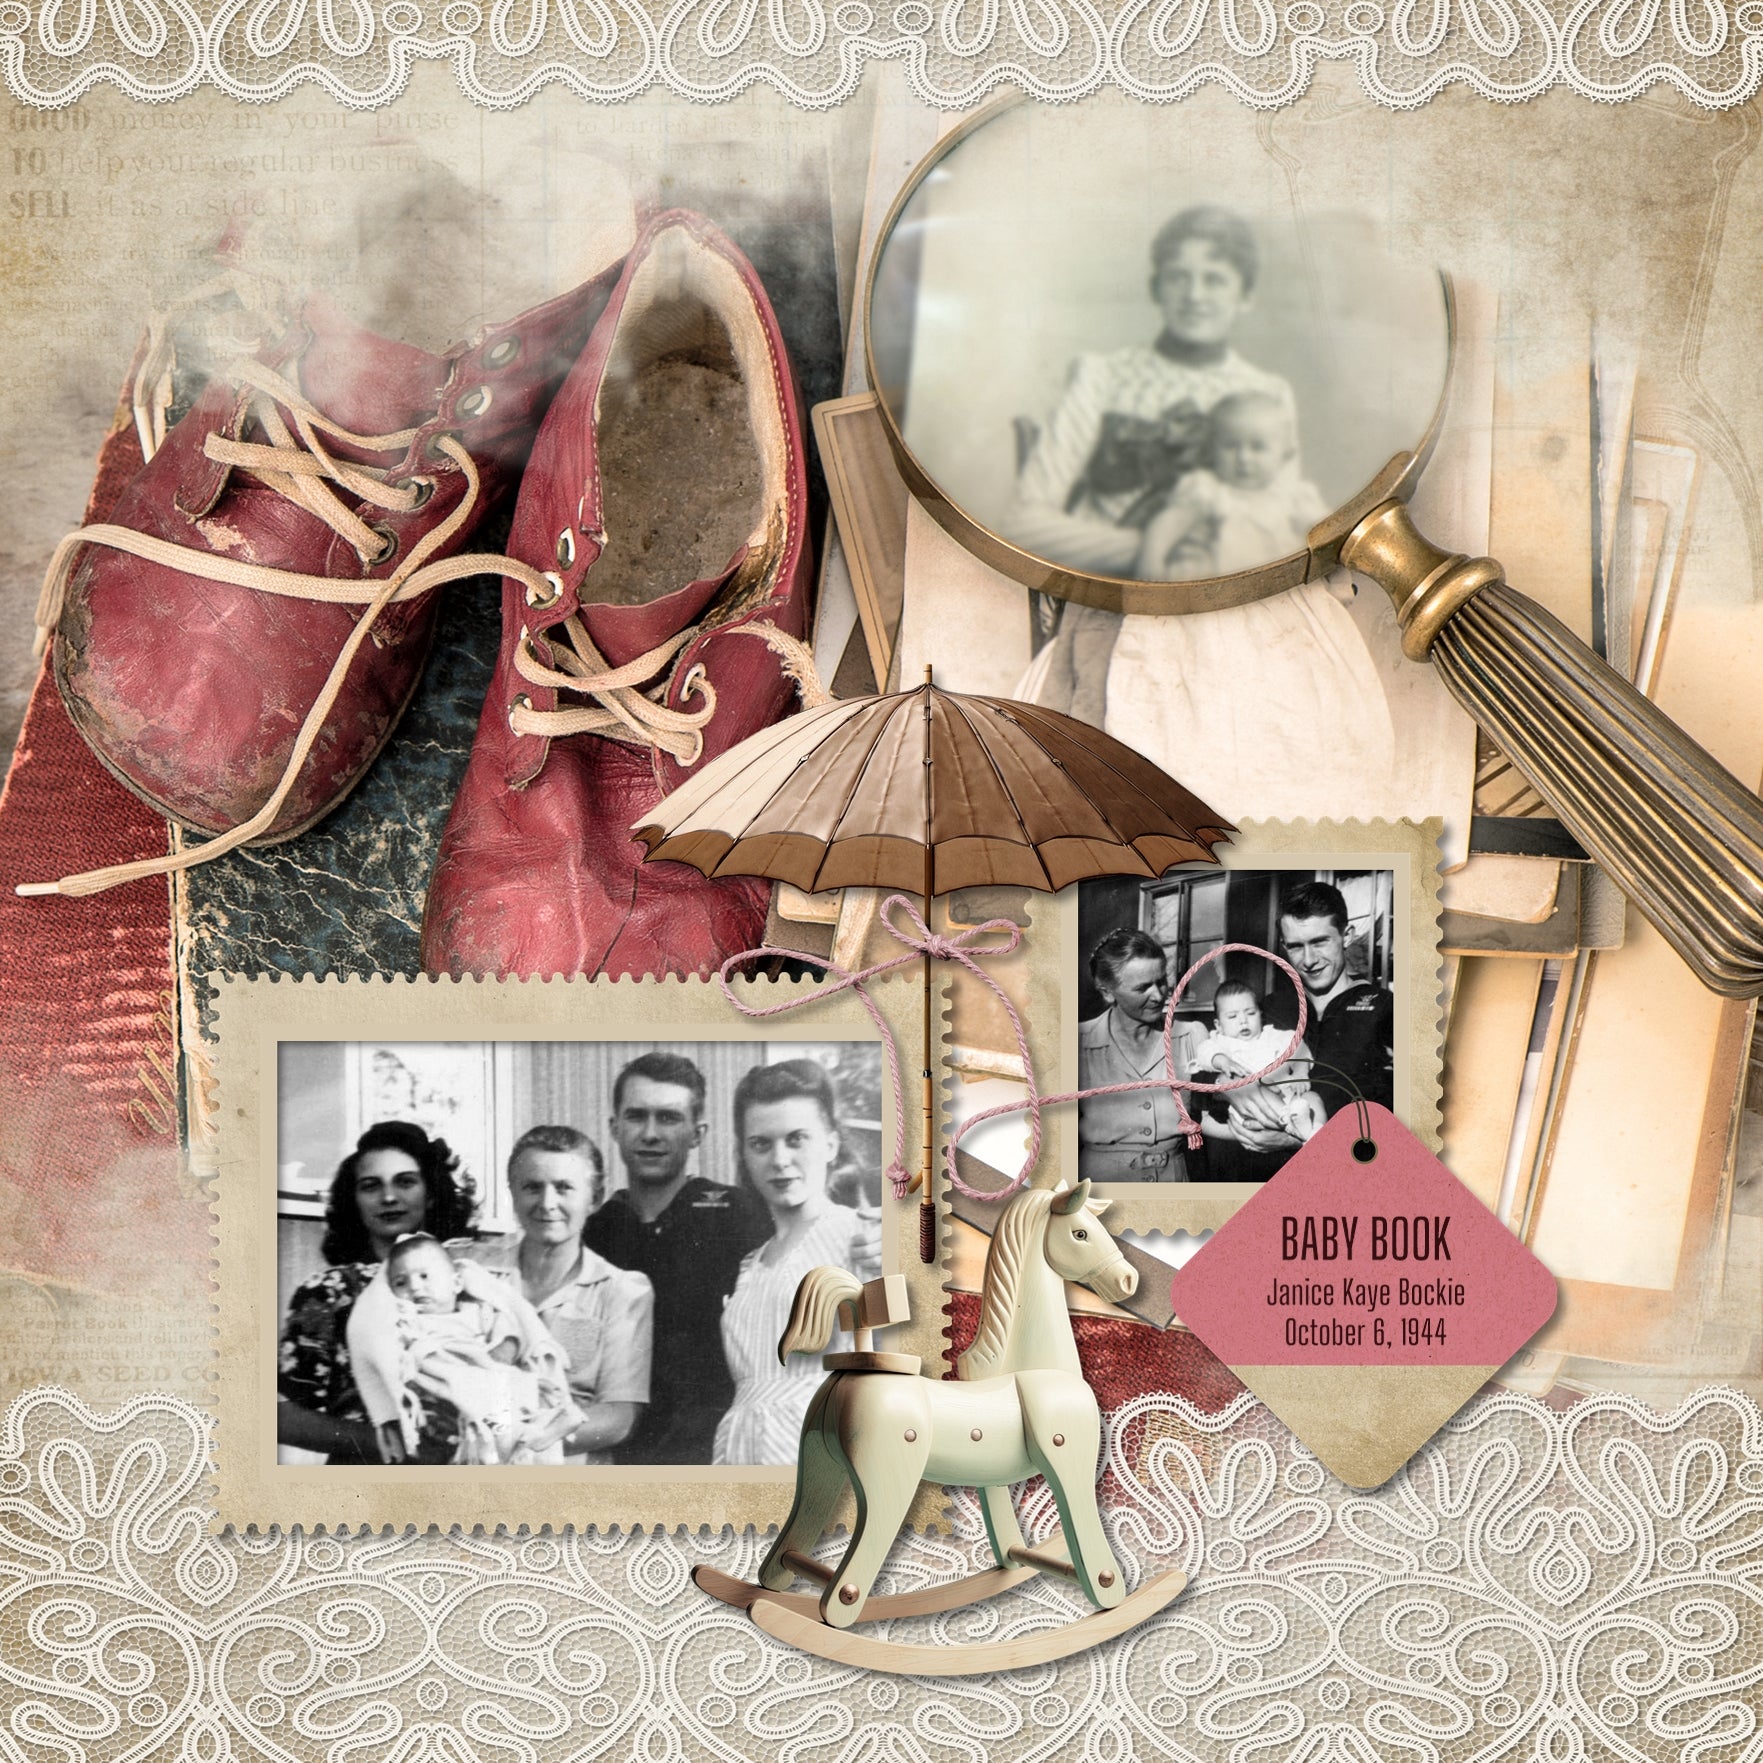 Great for genealogy and family history albums and keepsake digital art pages, these antique digital scrapbooking photo frames by Lucky Girl Creative digital art are perfect for layering with your antique photographs to give that realistic vintage look. Whether you love browsing through a flea market, vintage market, rummage or garage sale, these embellishments will showcase your treasured finds.